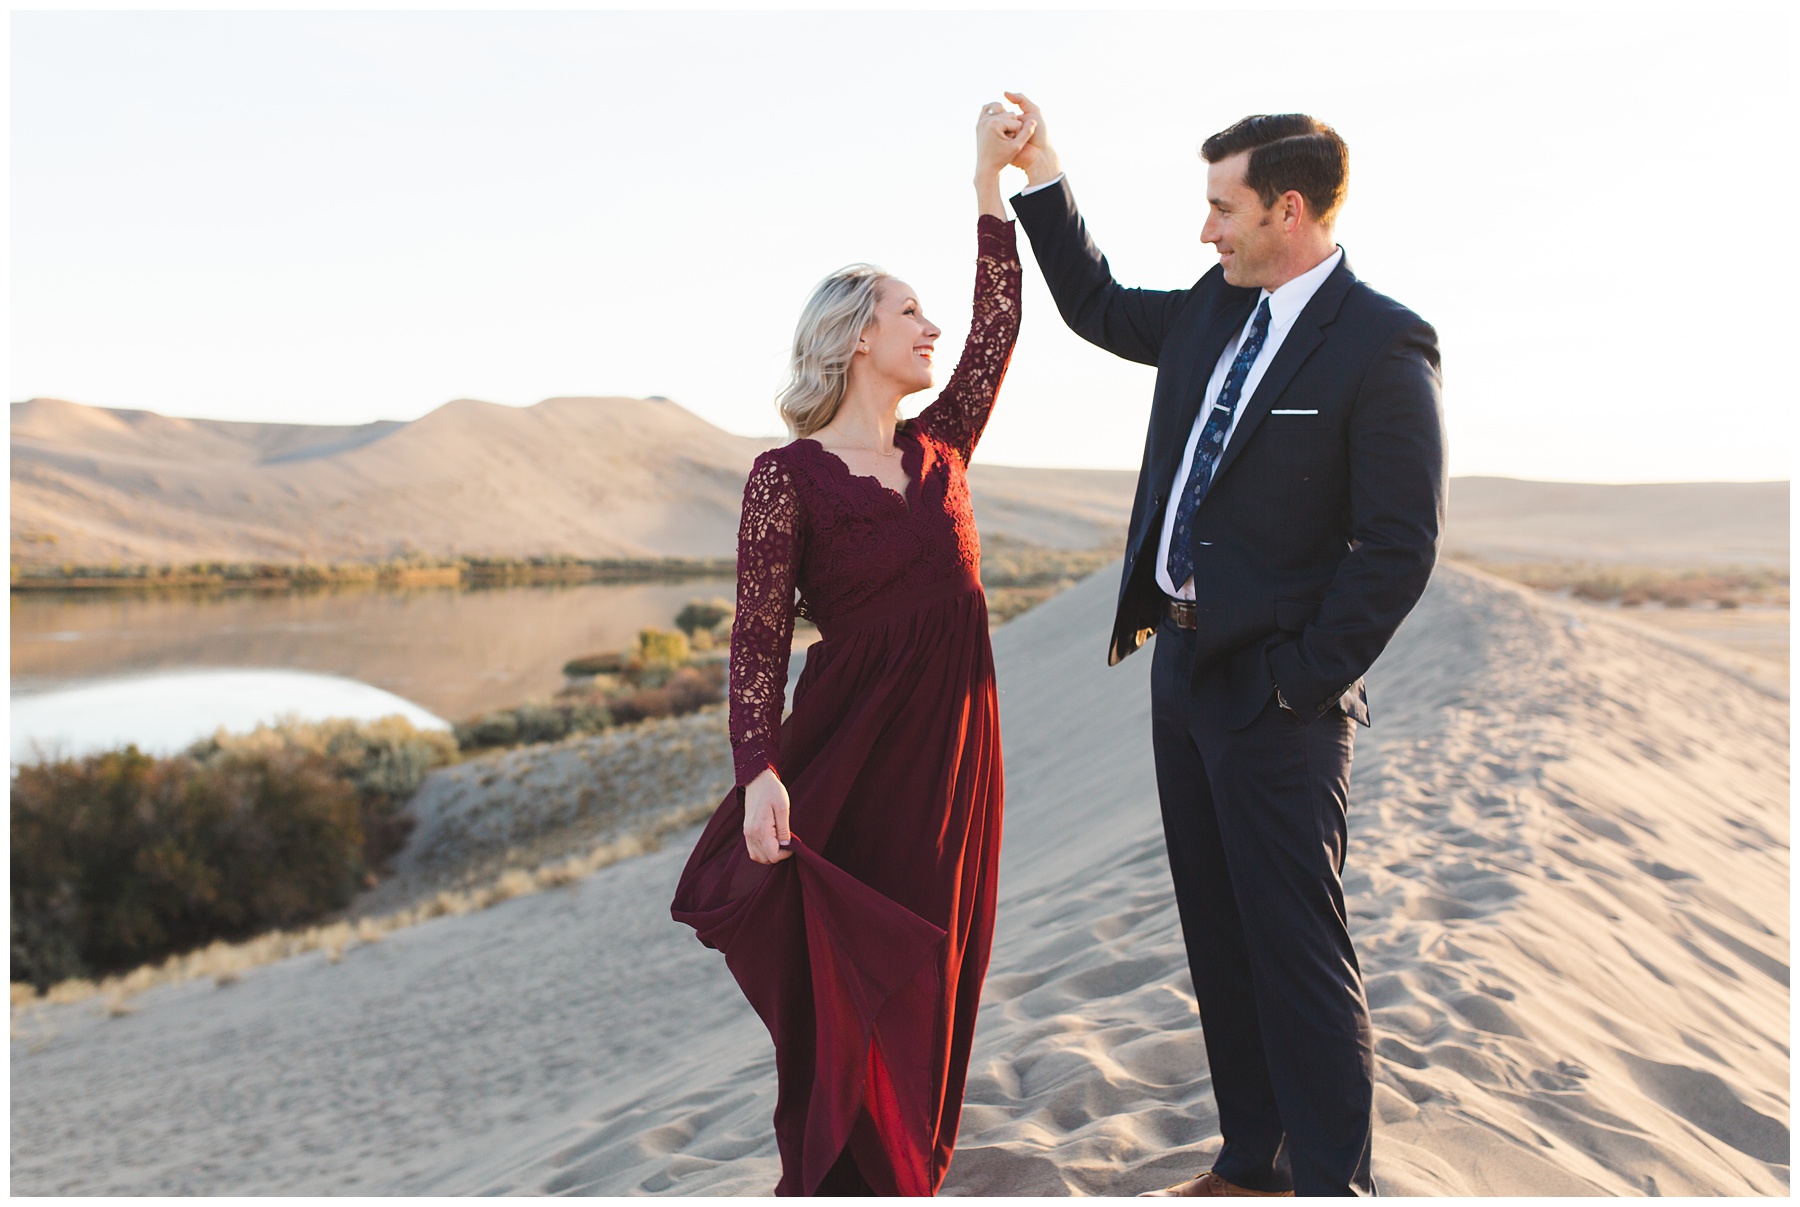 man in suit, woman in red dress dancing on the sand dunes